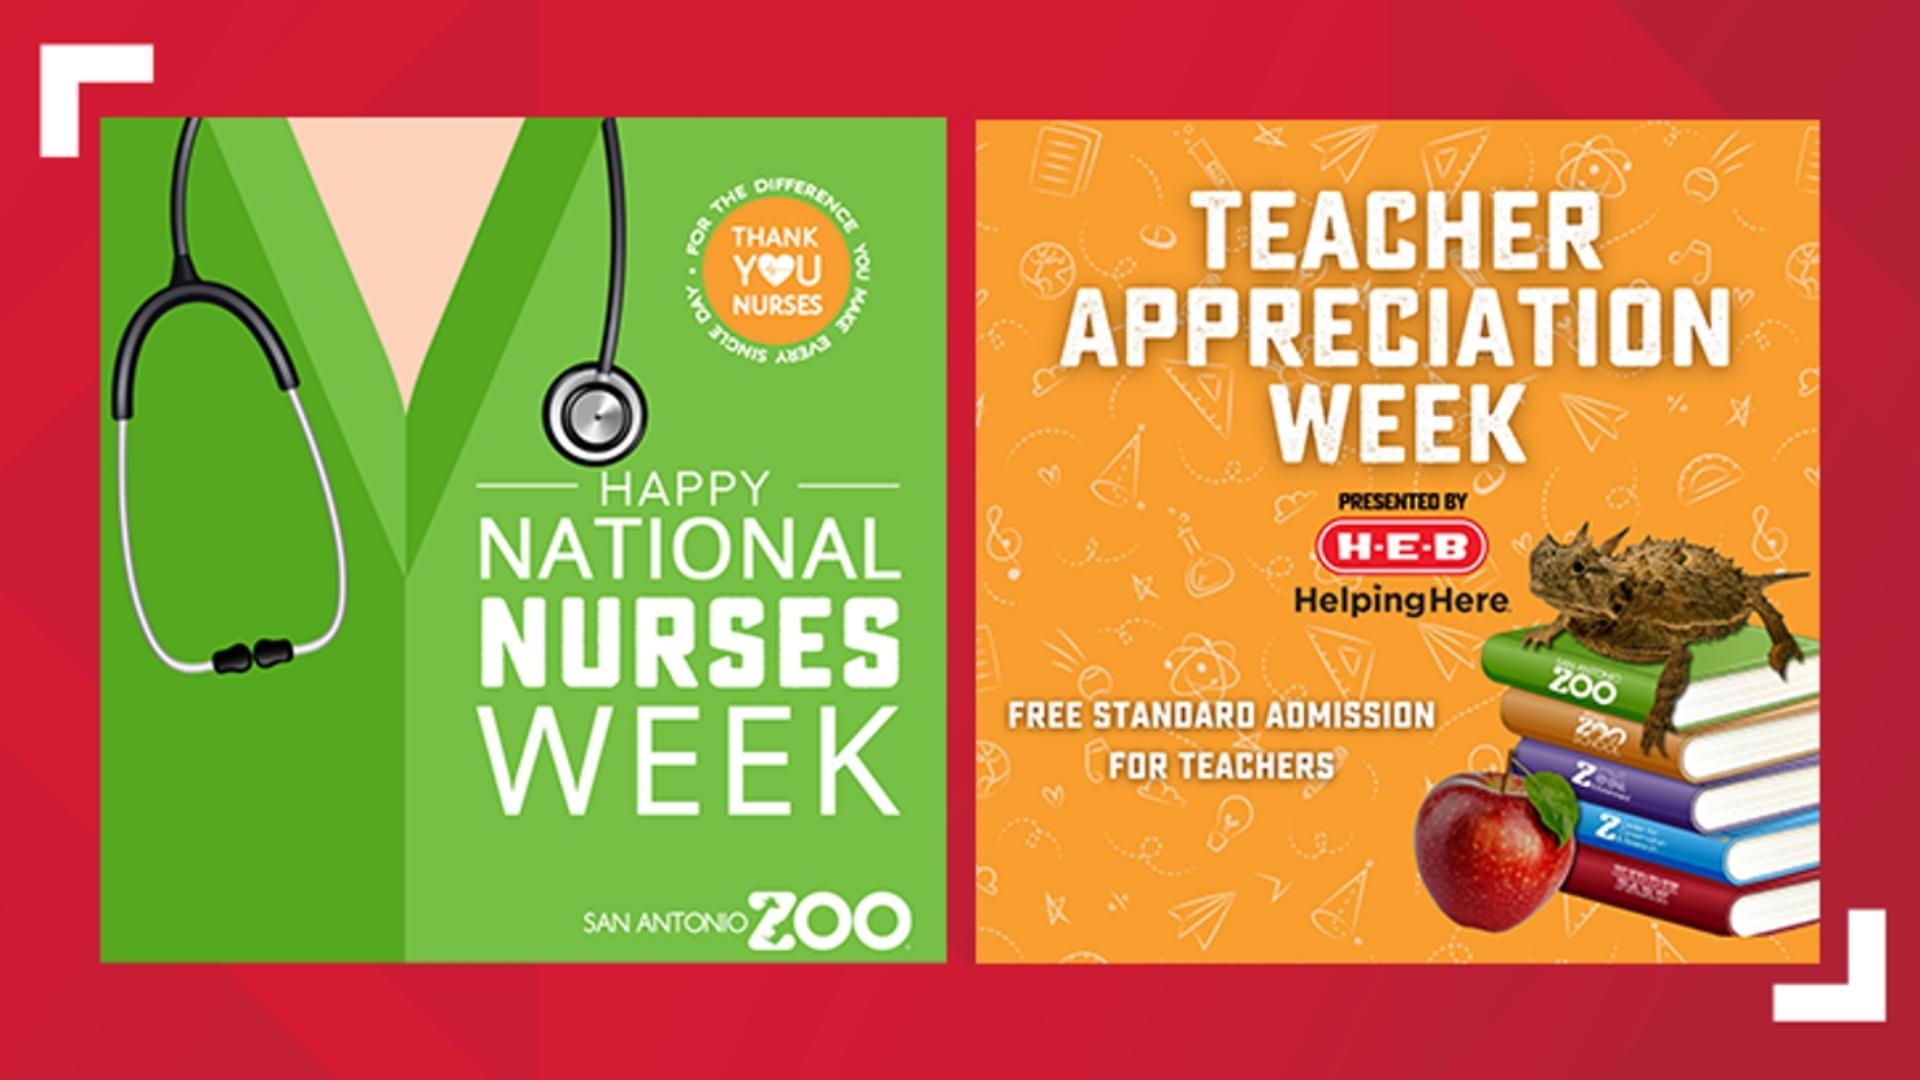 The zoo wants to show their appreciation during National Nurses Week and Teacher Appreciation Week, May 6-12.